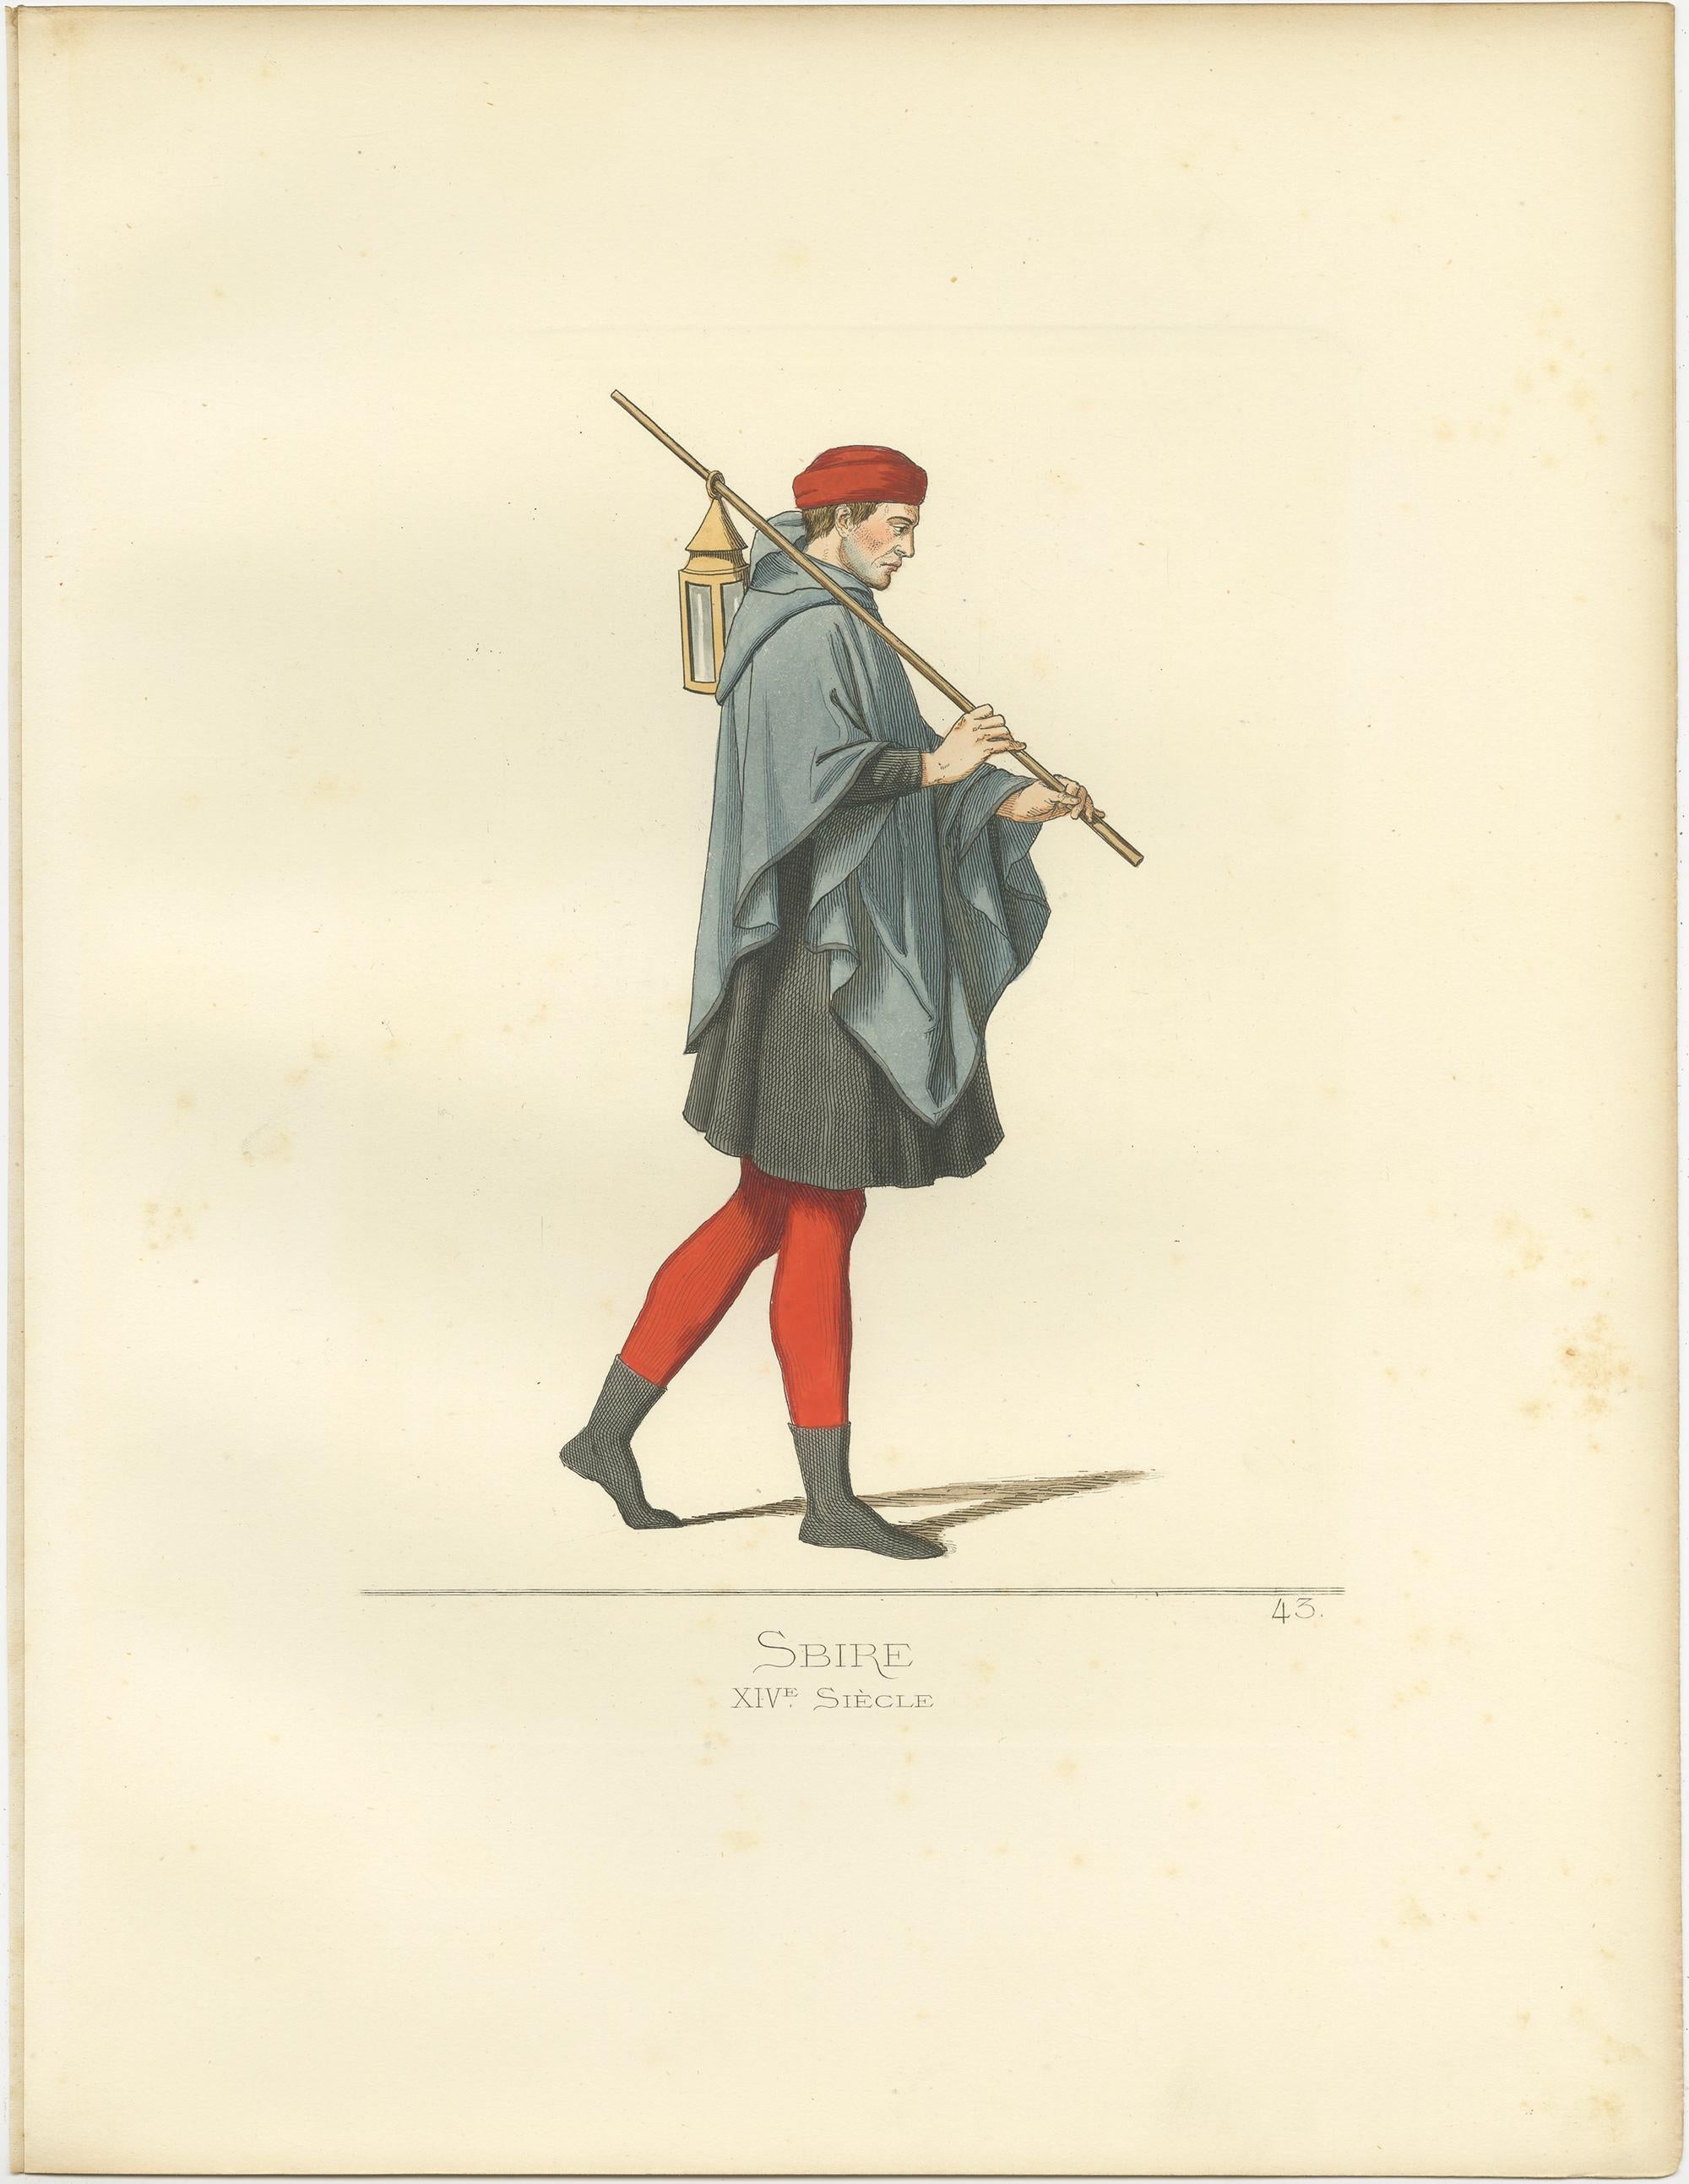 Antique print titled ‘Sbire, XIVe Siecle.’ Original antique print of a sbirre, a name given to a particular class of serjeants and archers in Italy. This print originates from 'Costumes historiques de femmes du XIII, XIV et XV siècle' by C. Bonnard.